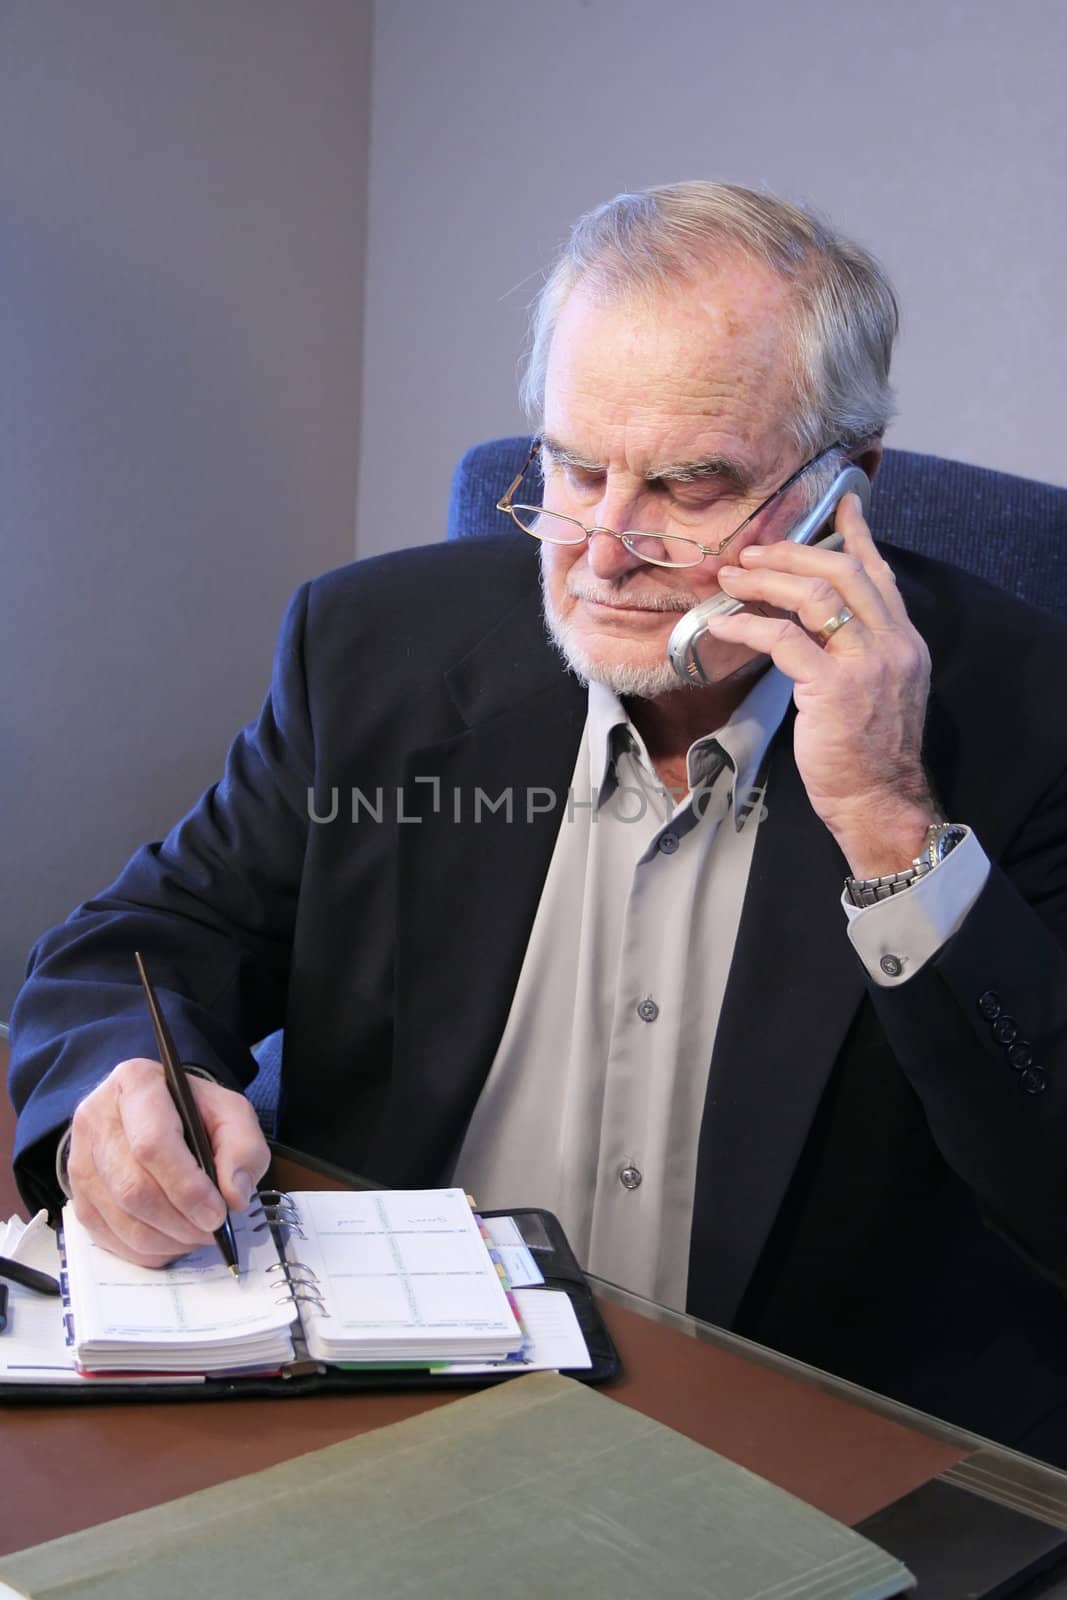 Mature Business Executive on phone taking notes